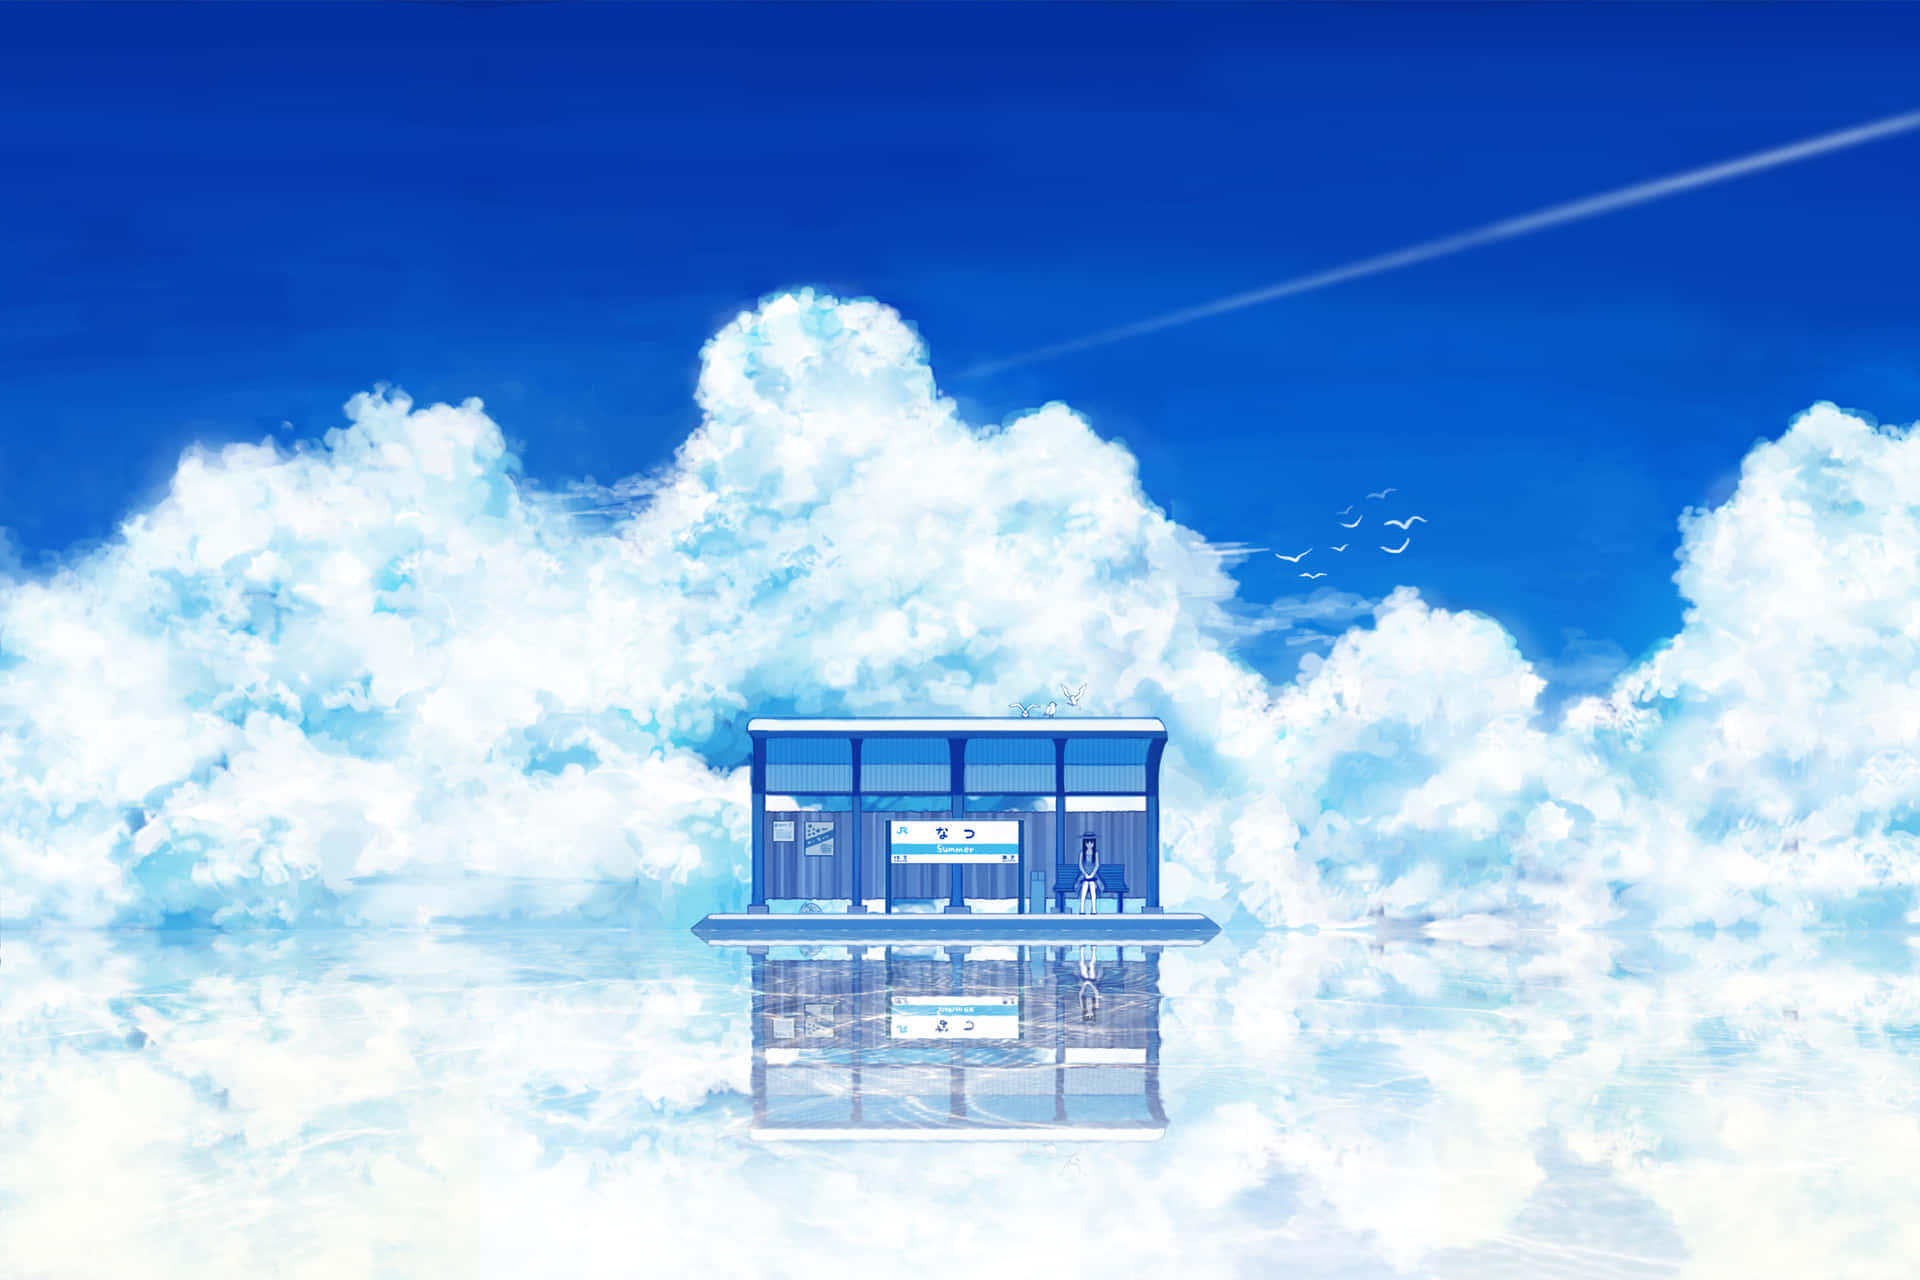 A Building With Clouds In The Sky